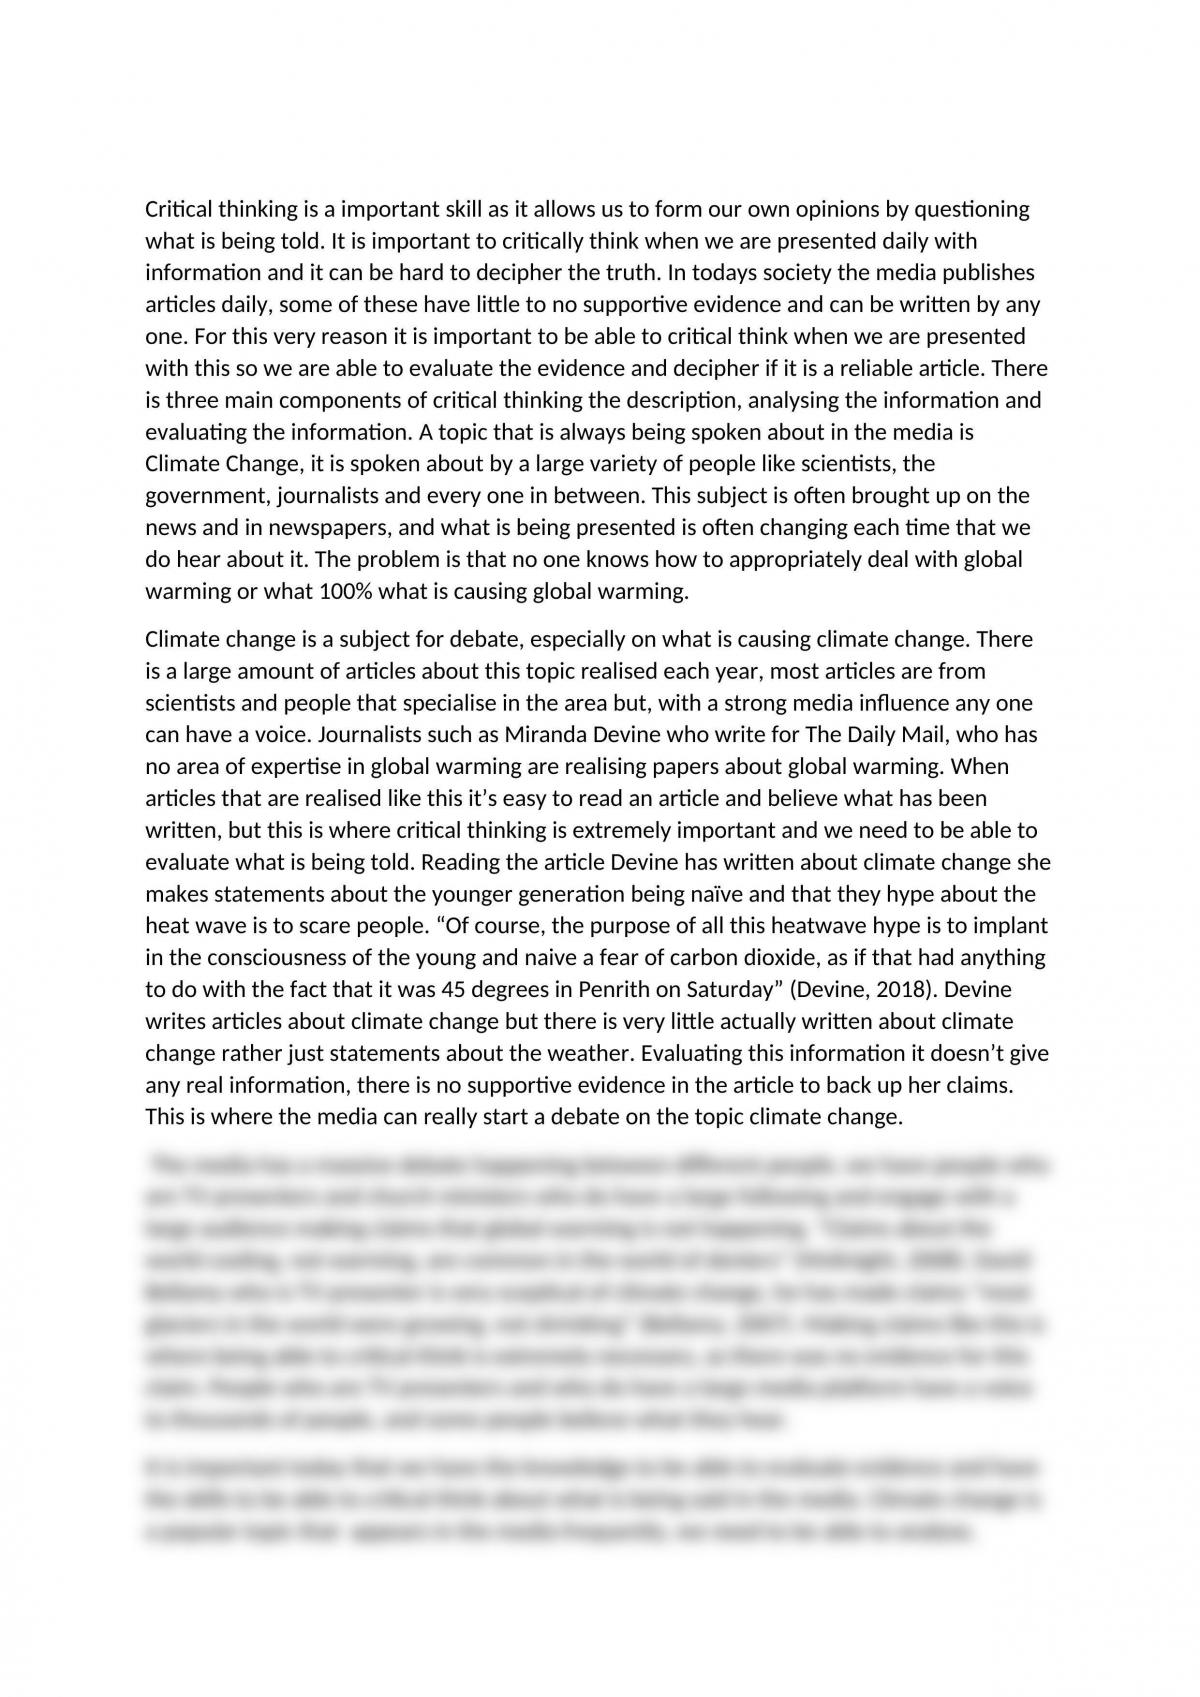 Essay on Climate Change - Page 2